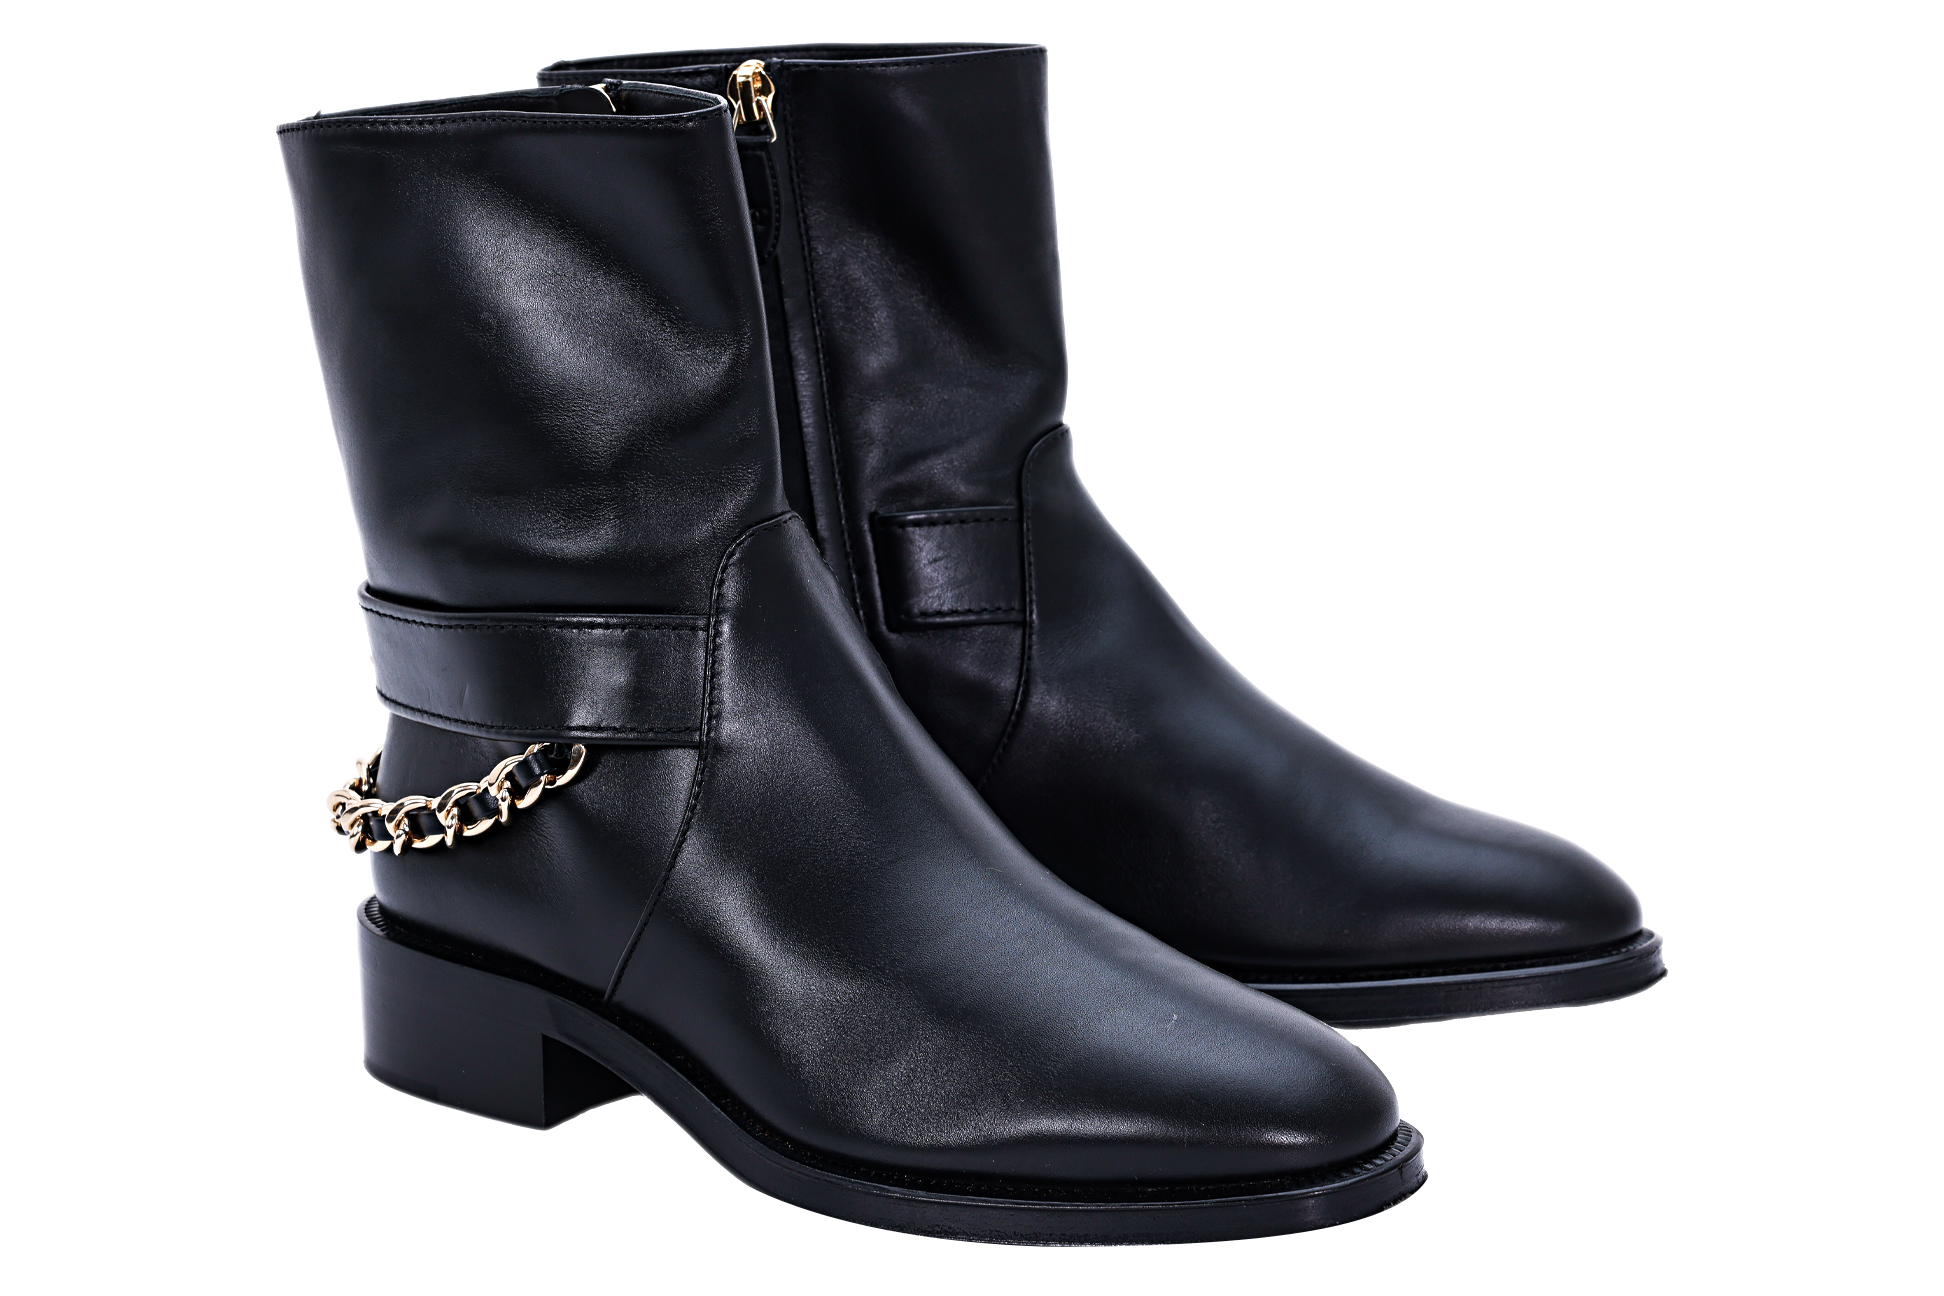 A PAIR OF CHANEL LEATHER ANKLE MOTO BOOTS